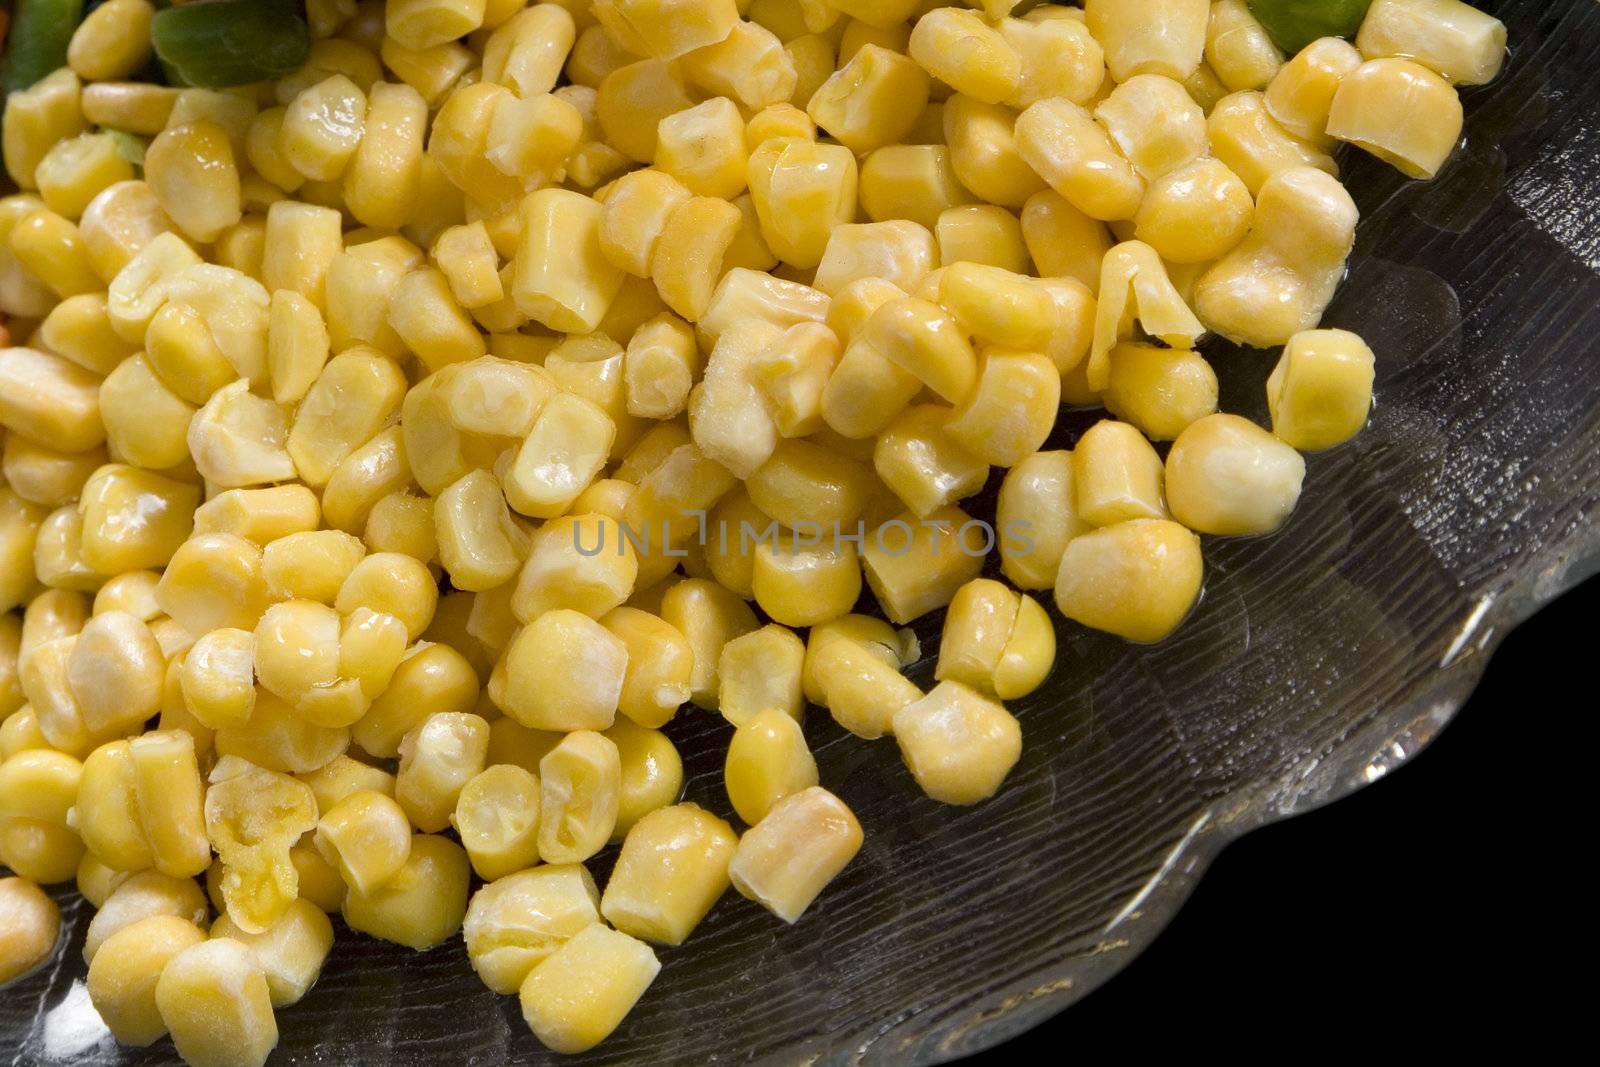 Precooked corn on a glass dish by PauloResende